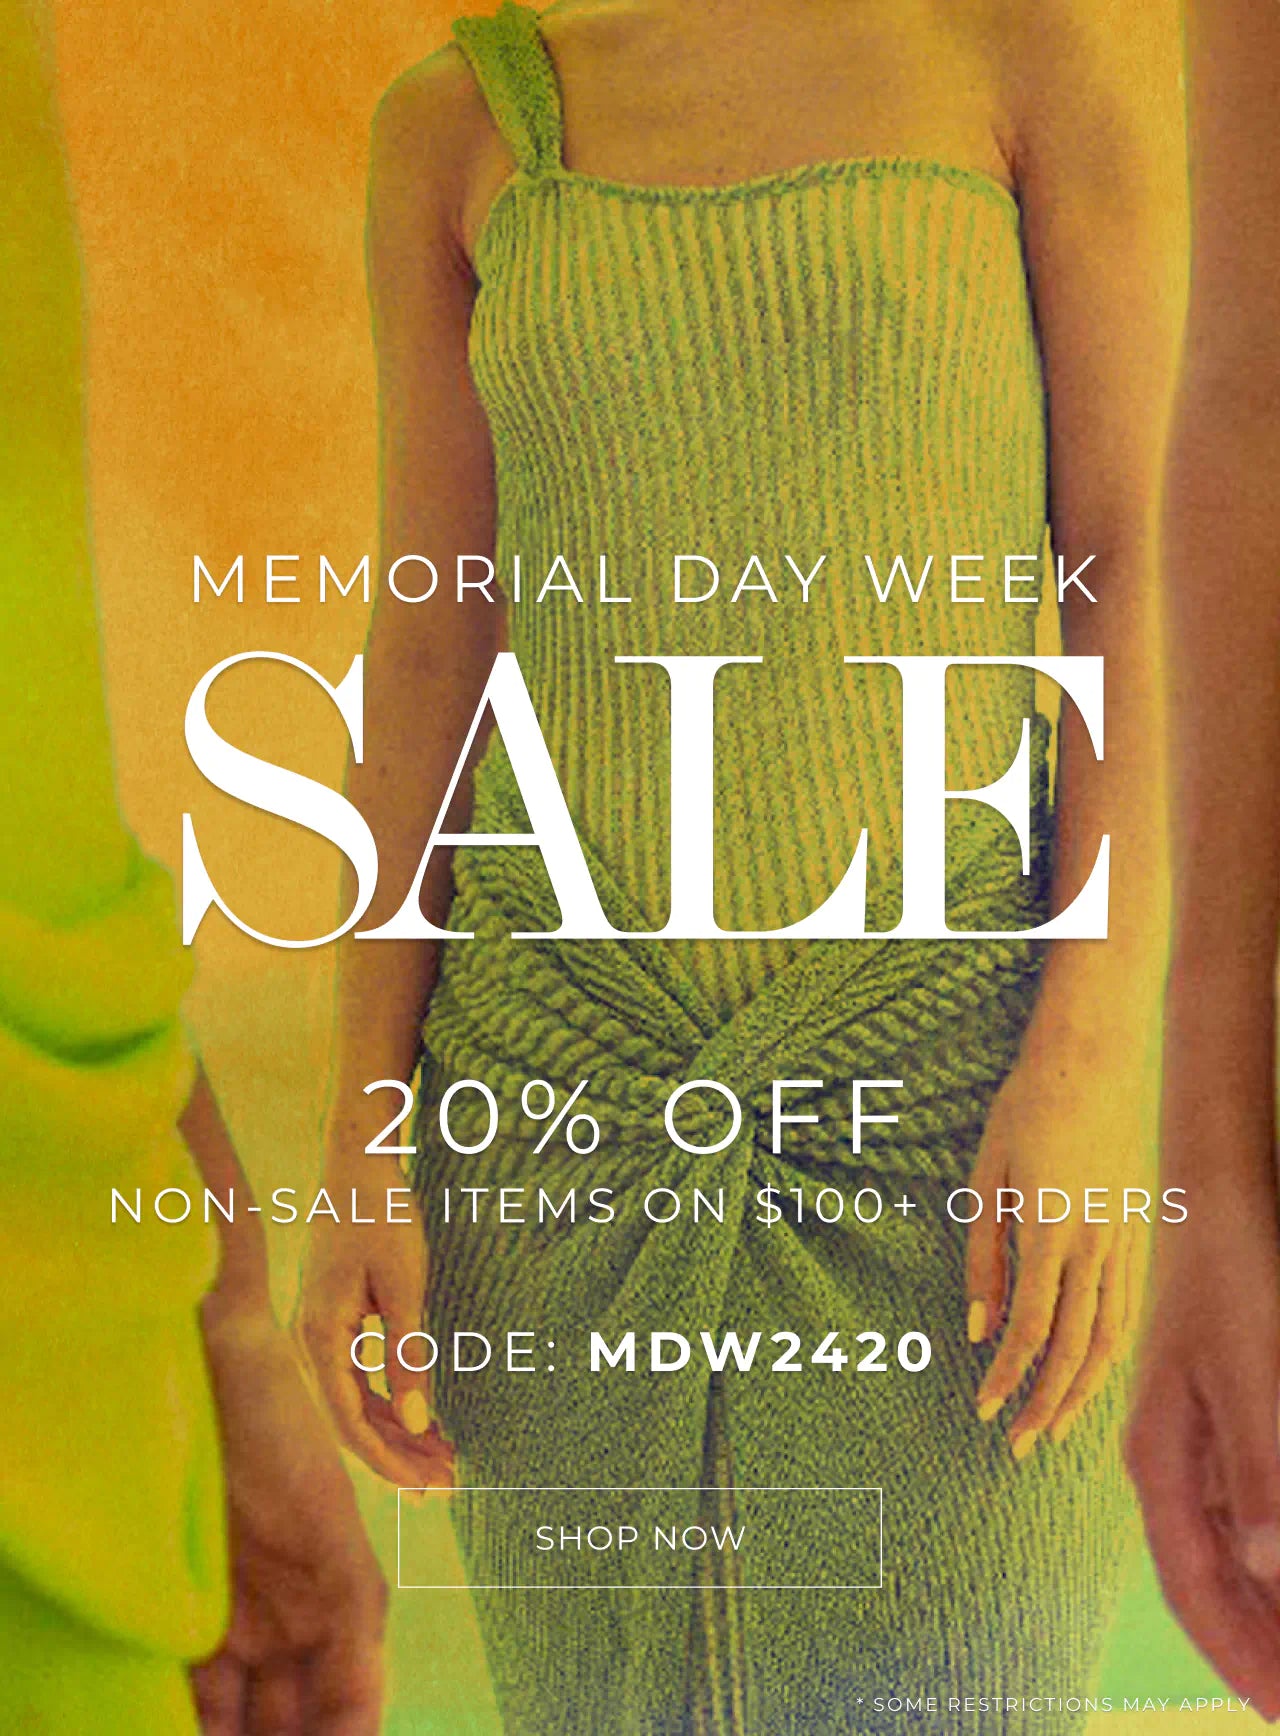 The Memorial Day Week Sale is here! 20% OFF non-sale items on $100+ orders. Use code: MDW2420. Shop now. Some restrictions may apply